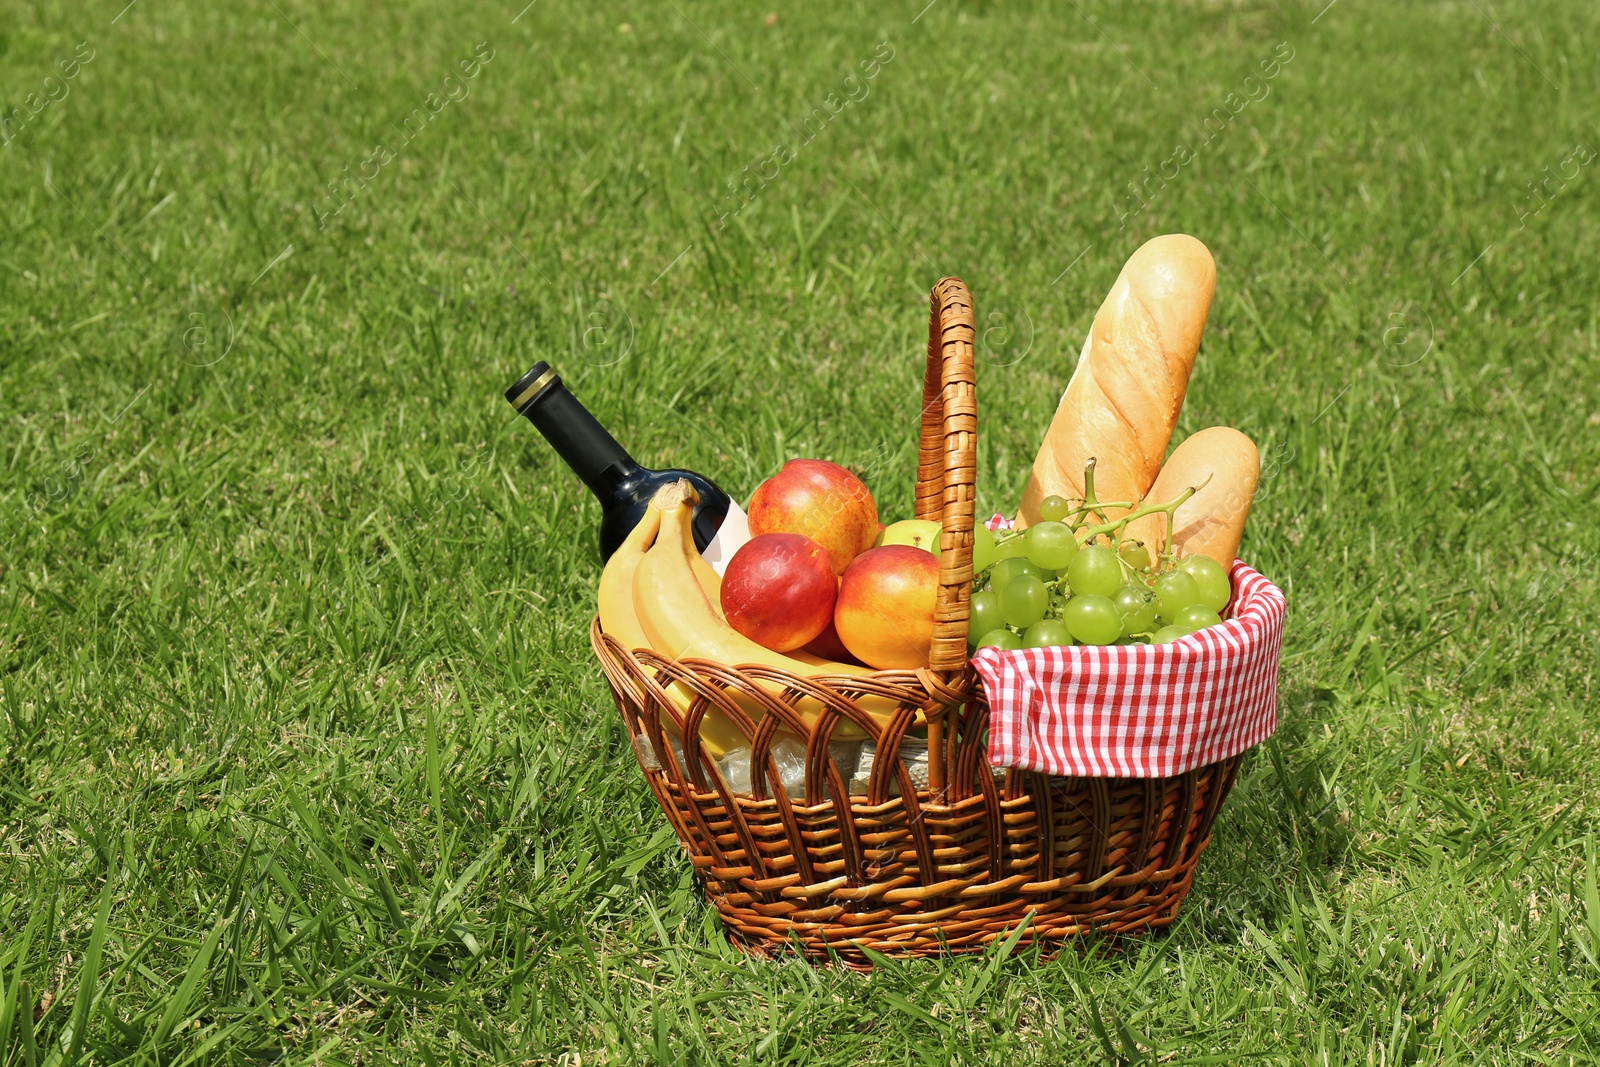 Photo of Basket with food and bottle of wine on lawn in park. Summer picnic